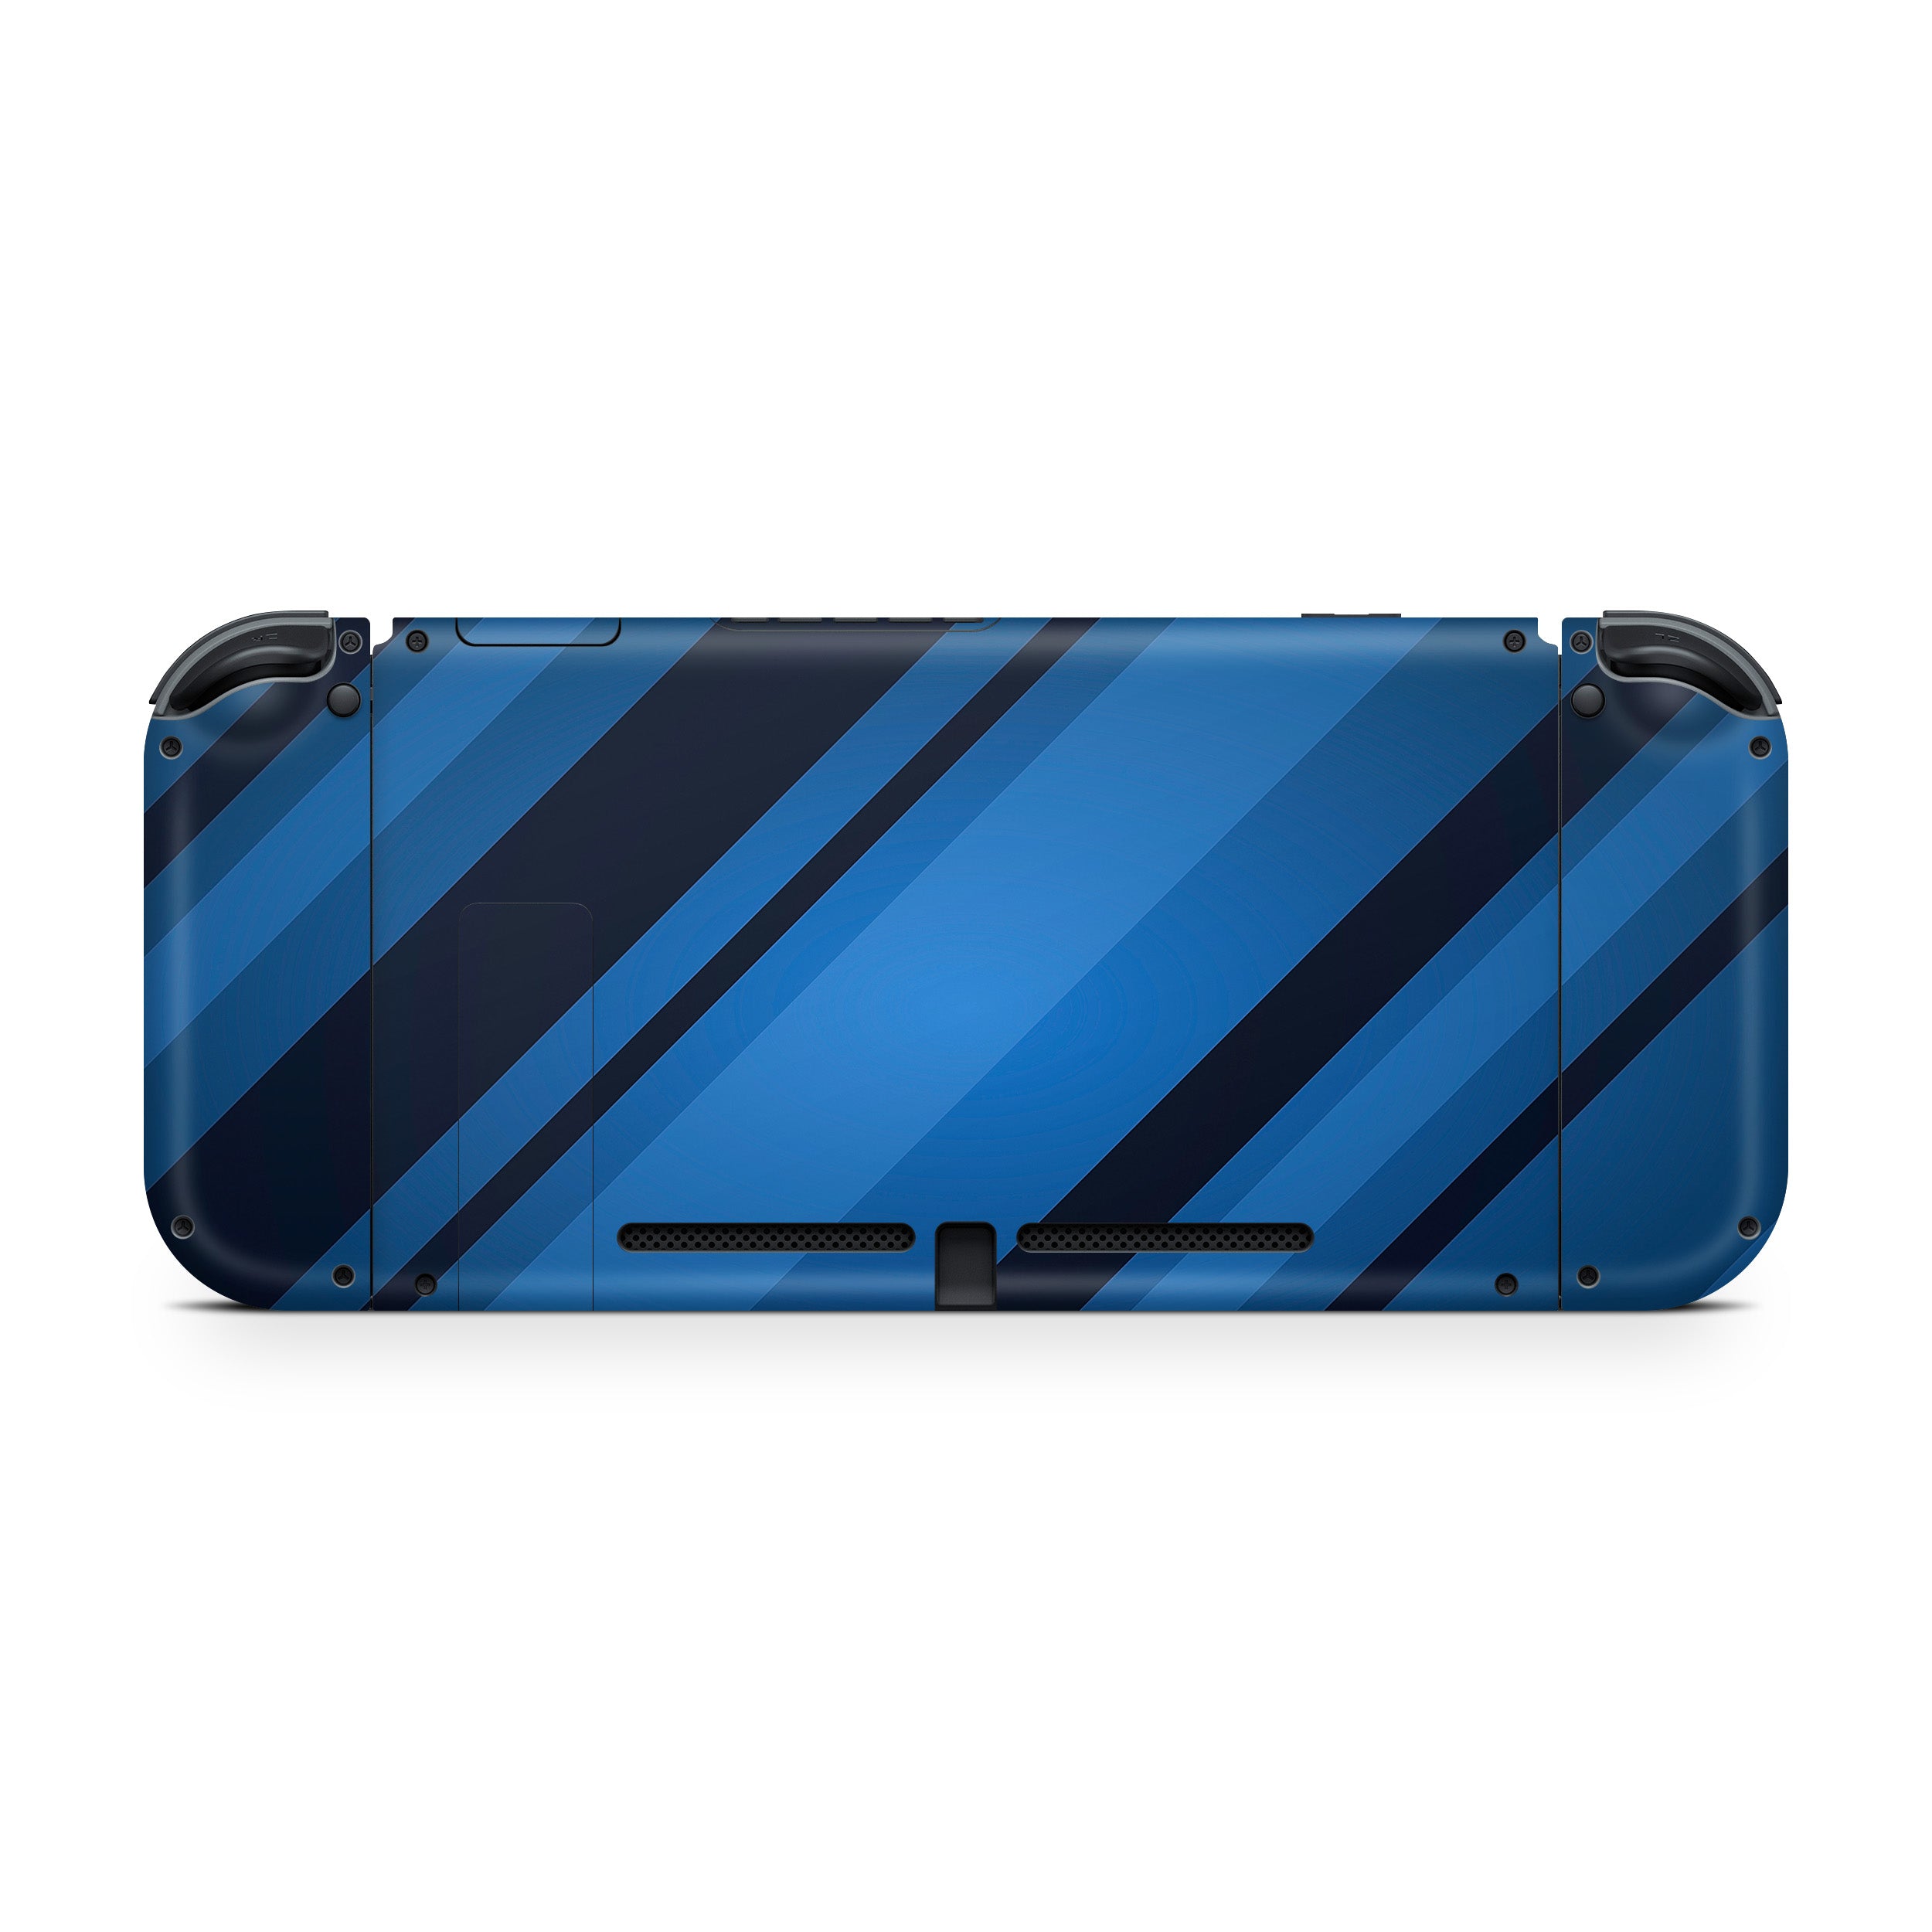 A video game skin featuring a Blue Streaks design for the Nintendo Switch.